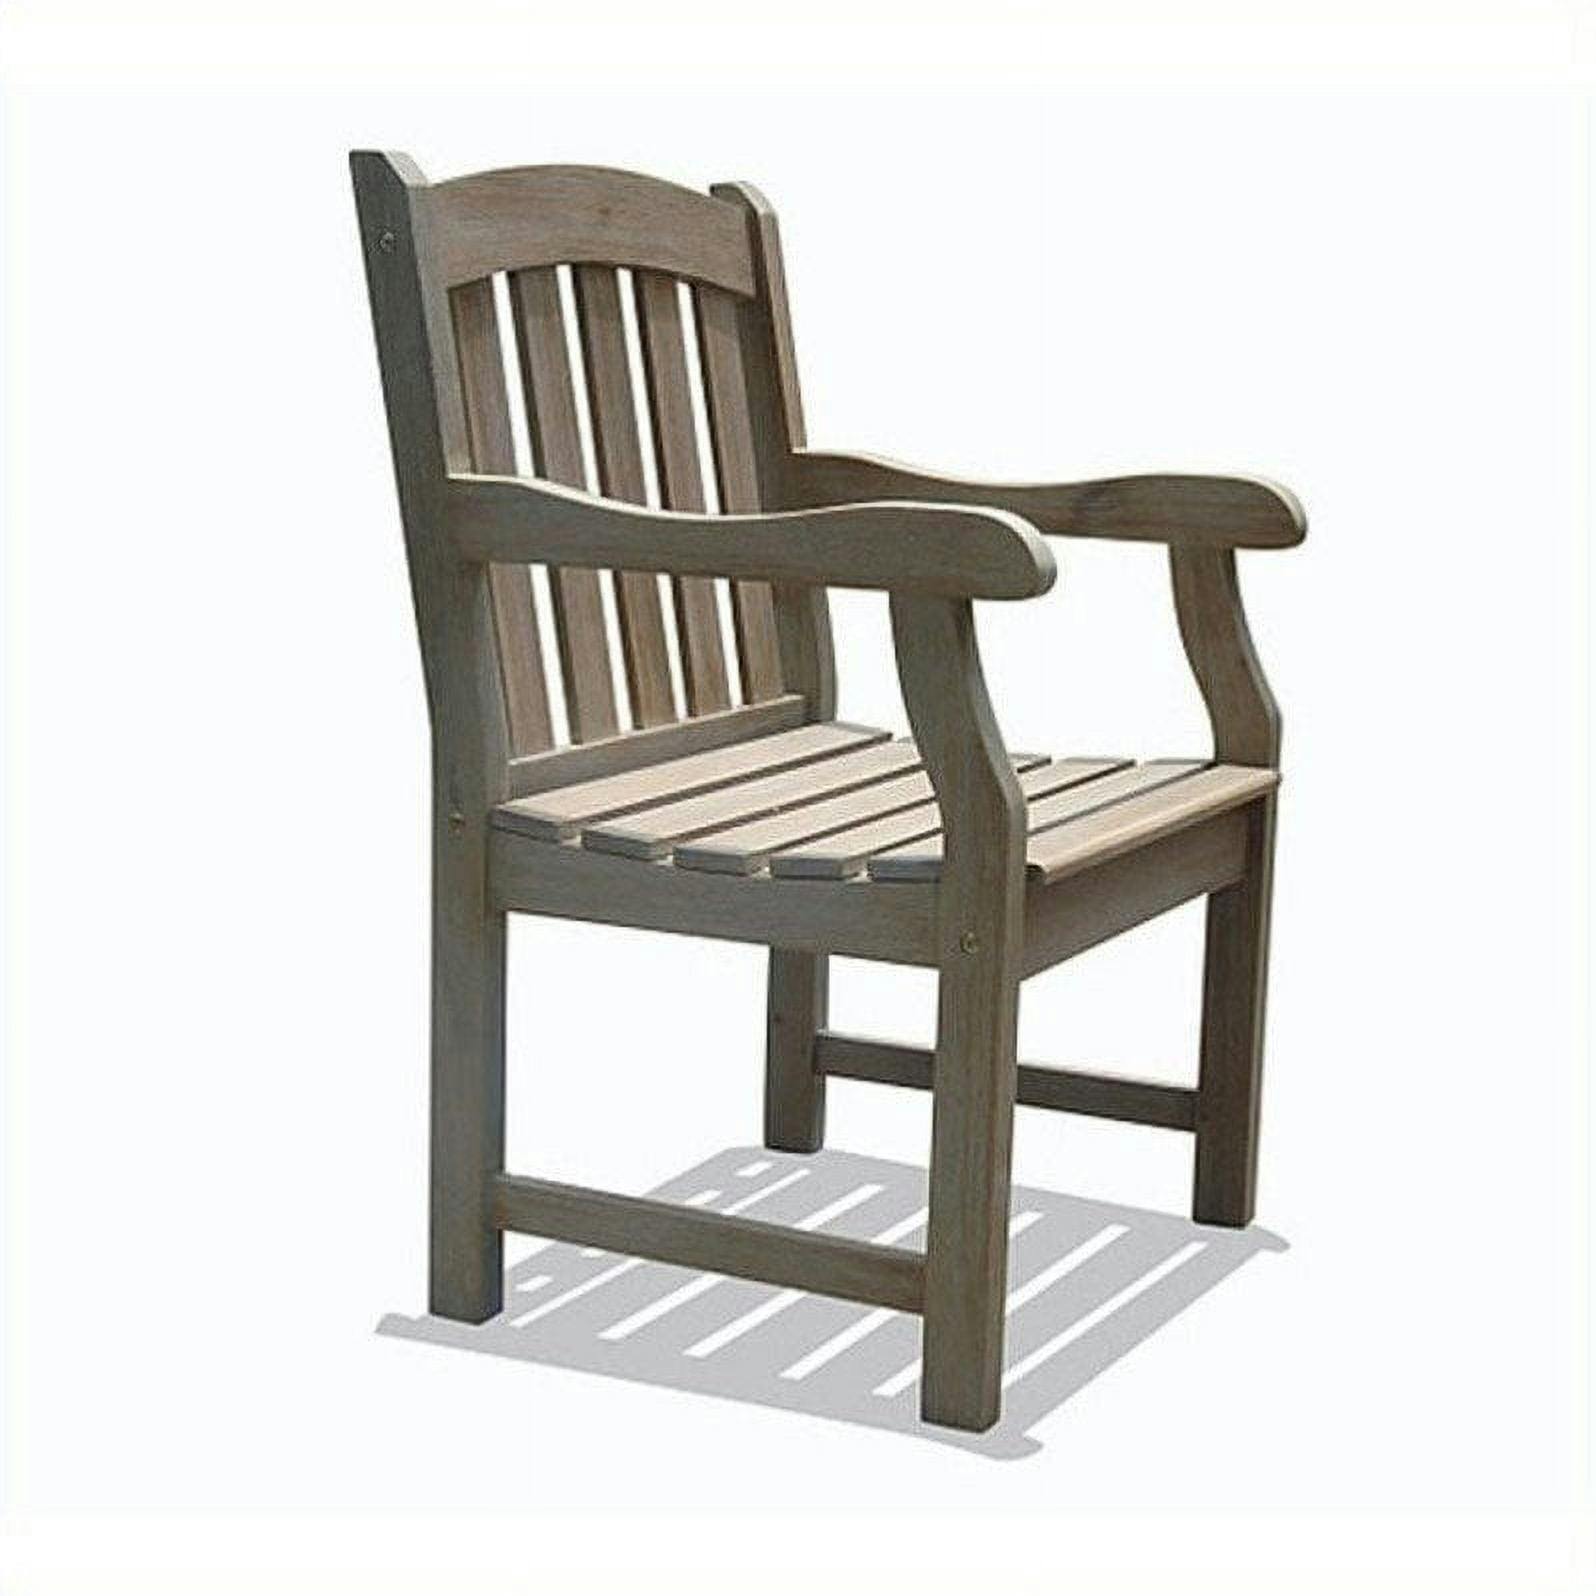 Renaissance Acacia Wood Outdoor Dining Chair with Hand-Scraped Finish